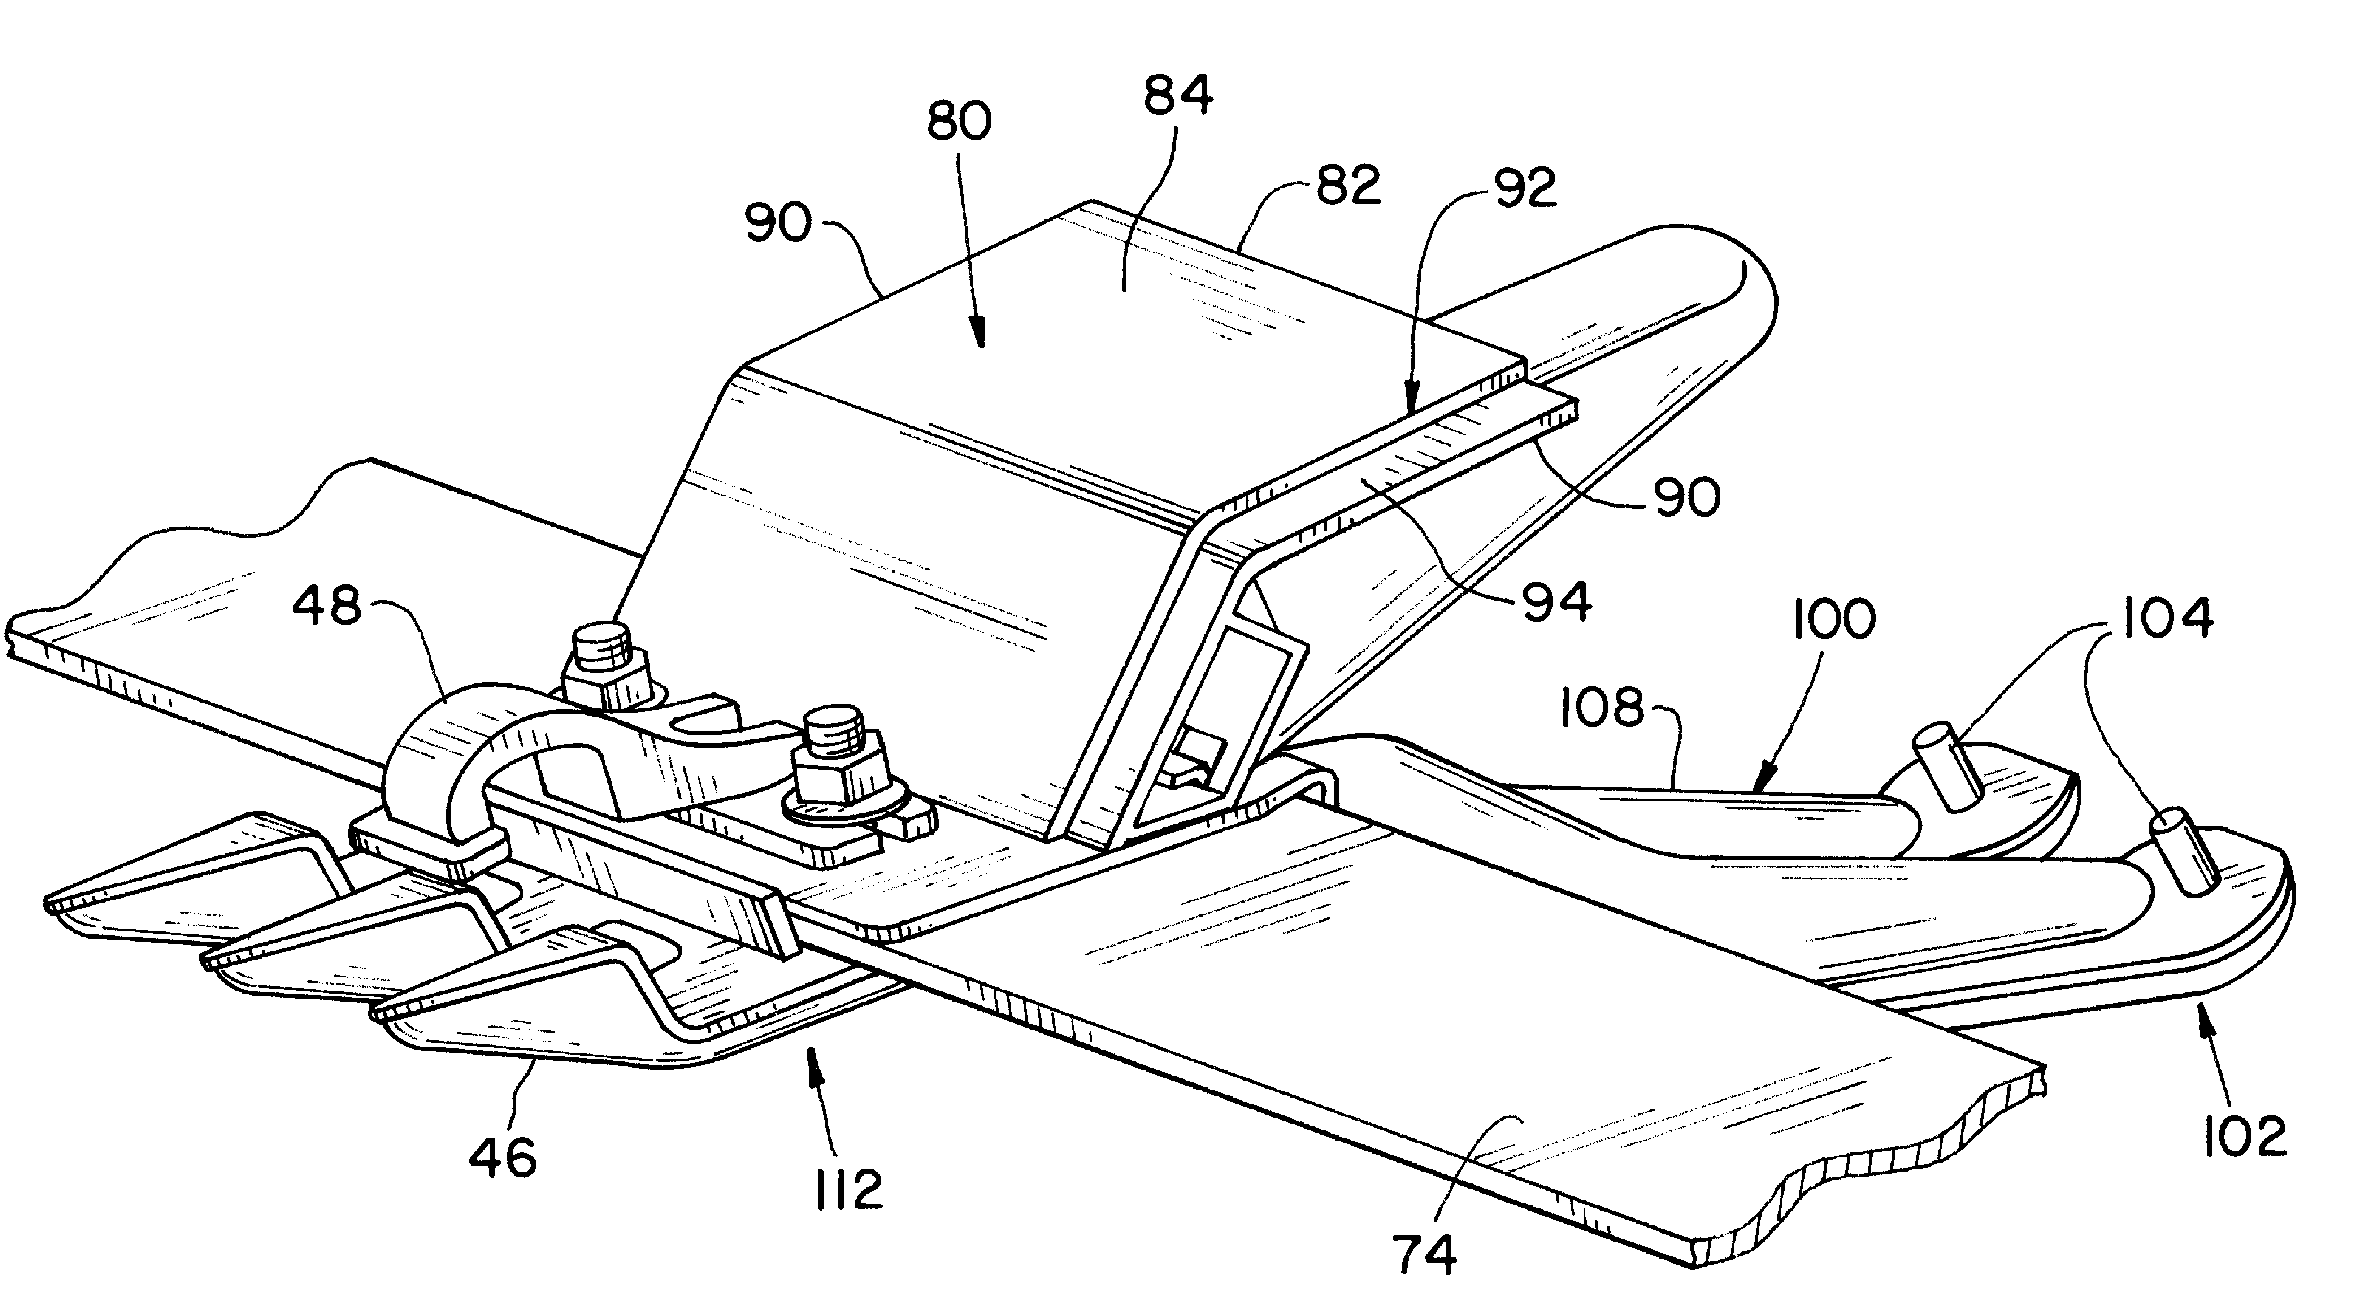 Integrated draper belt support and skid shoe in an agricultural harvesting machine